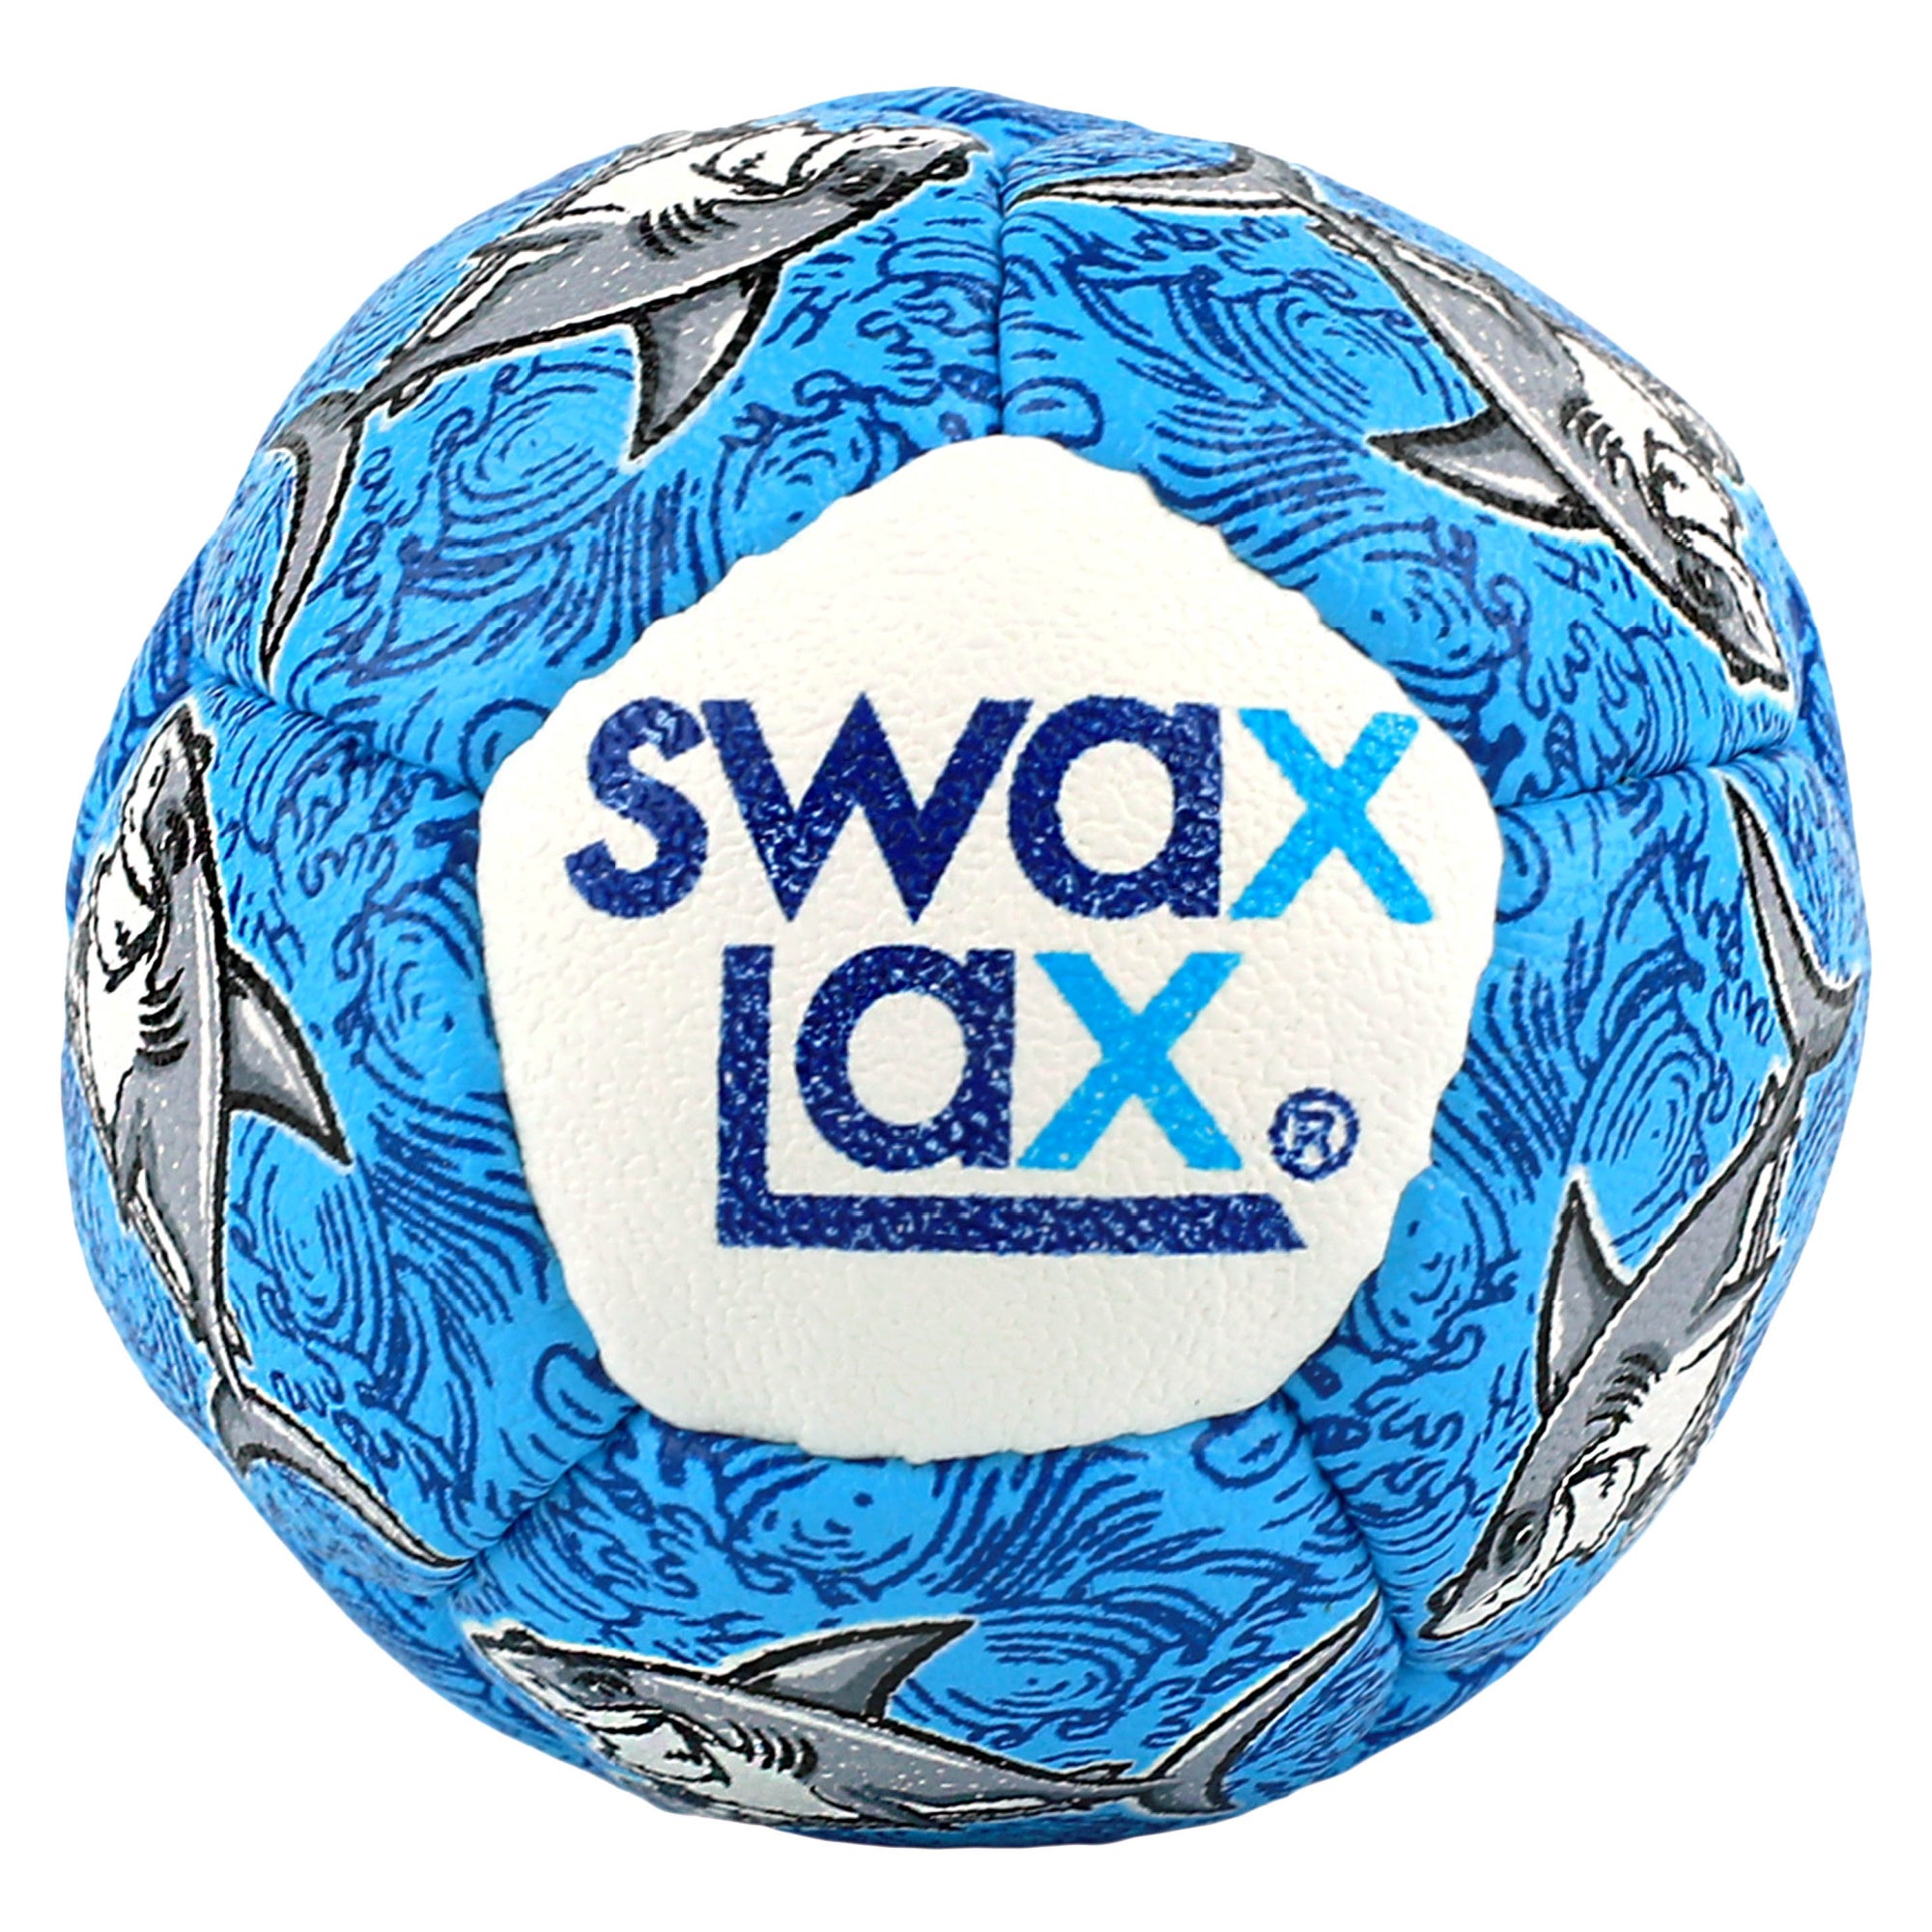 Swax Lax Shark Lacrosse Training Ball - Front View